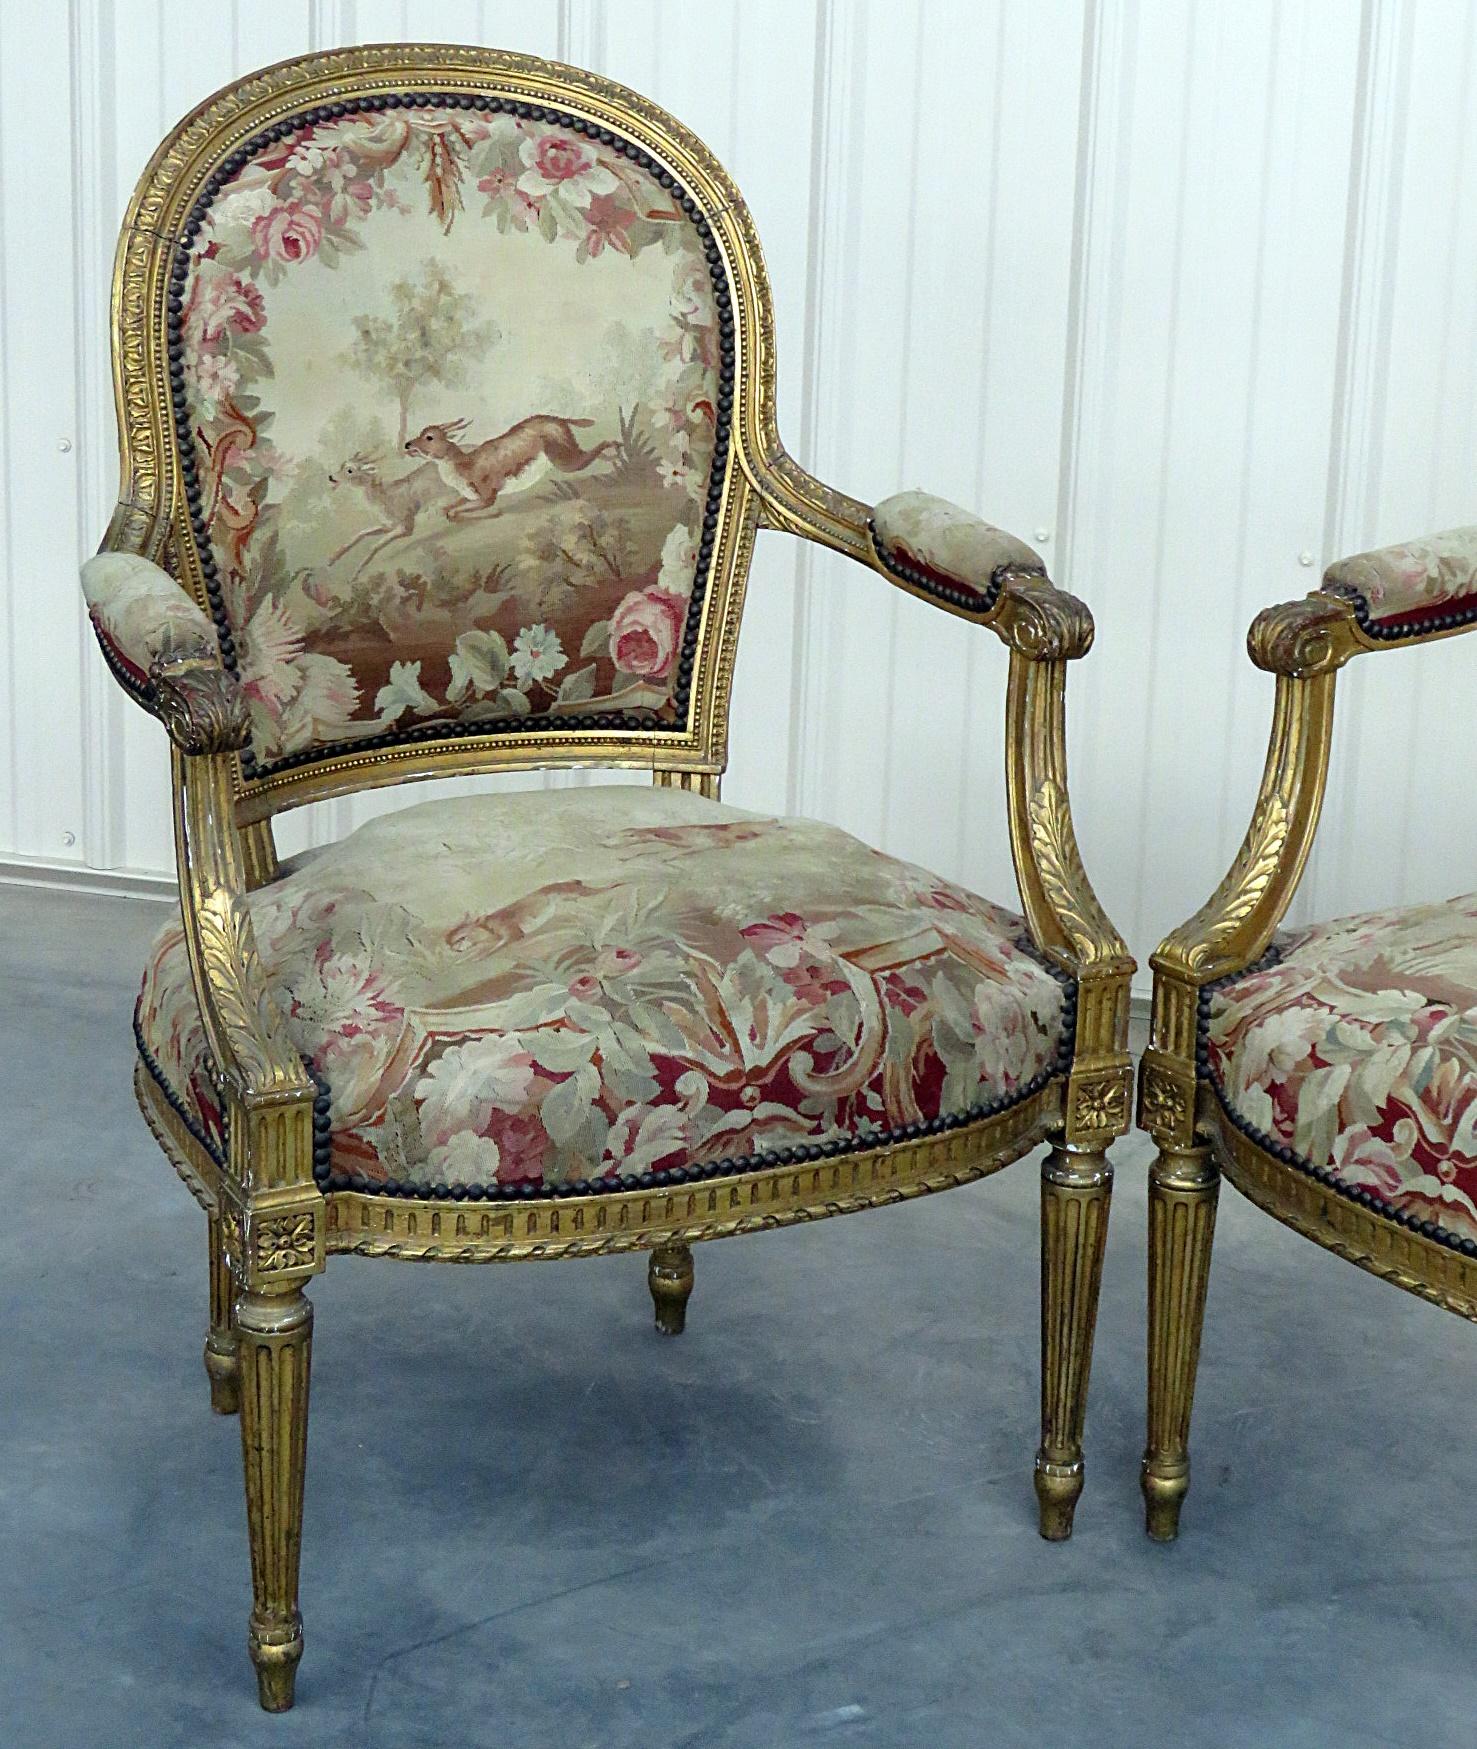 Pair of French Louis XVI style needlepoint fauteuils with gilt frames.